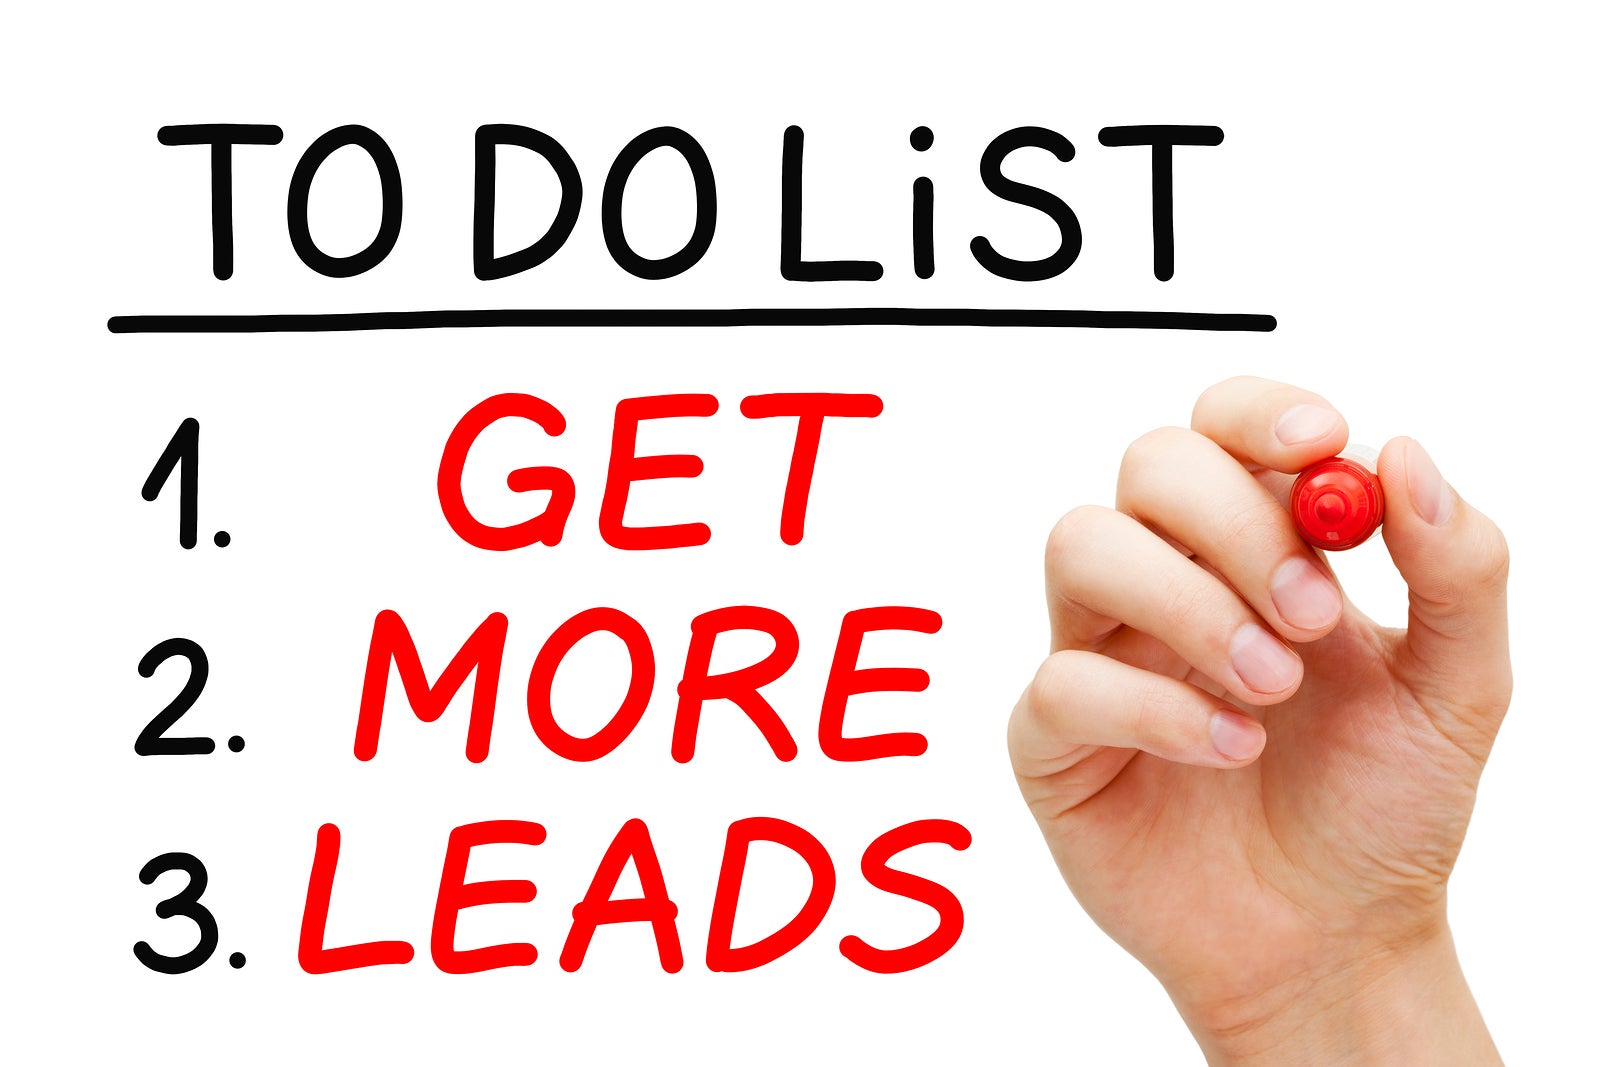 Yes, You Can Capture Leads Effectively & Affordably. Here’s How